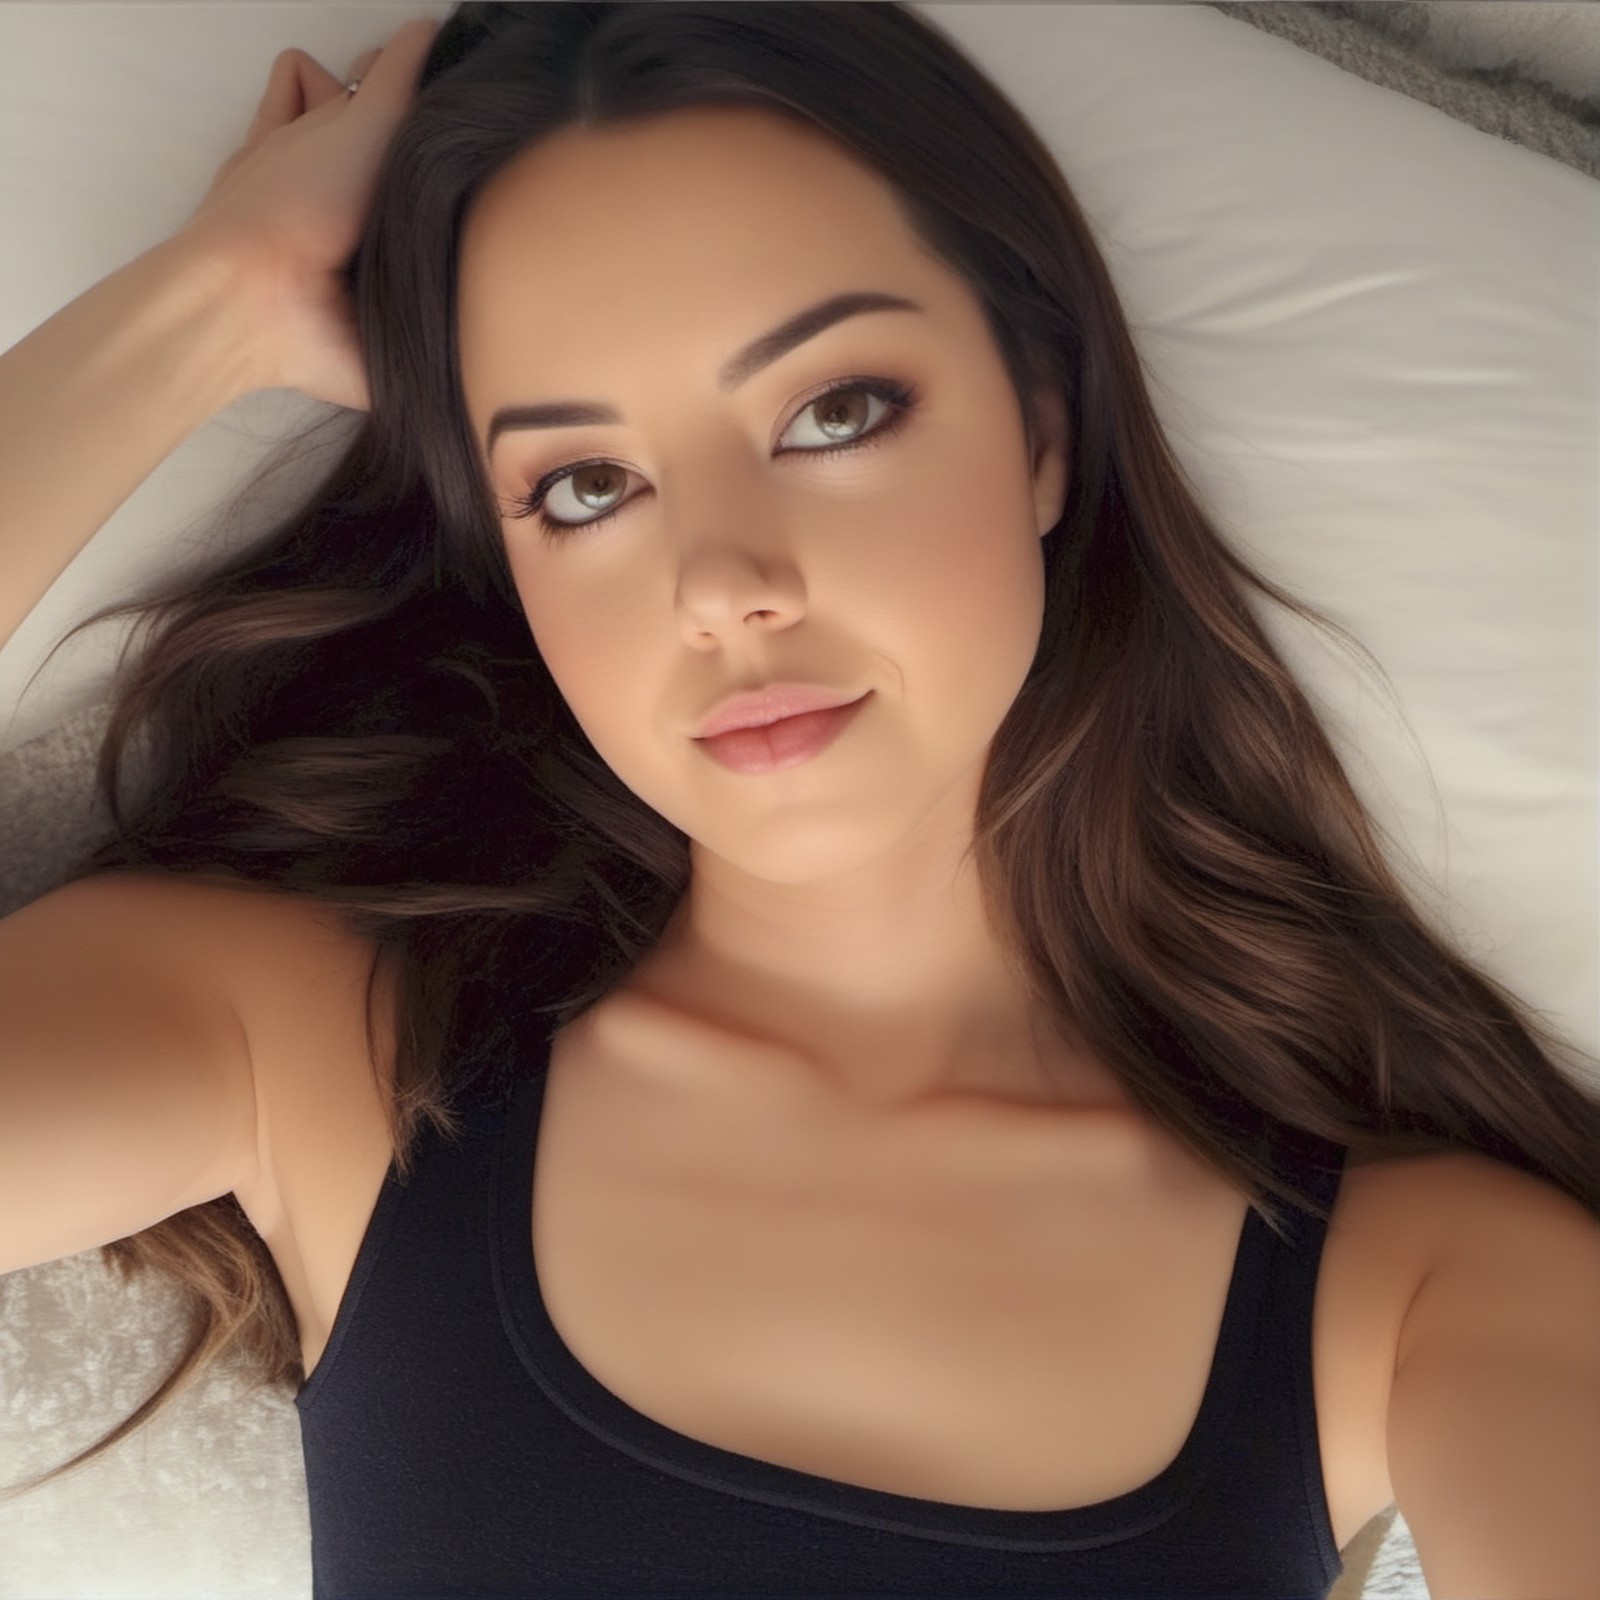 aubreyplaza  a beautiful woman 26 years old,selfie| shot from above| medium shot| turtleneck | young woman| lying on her b...